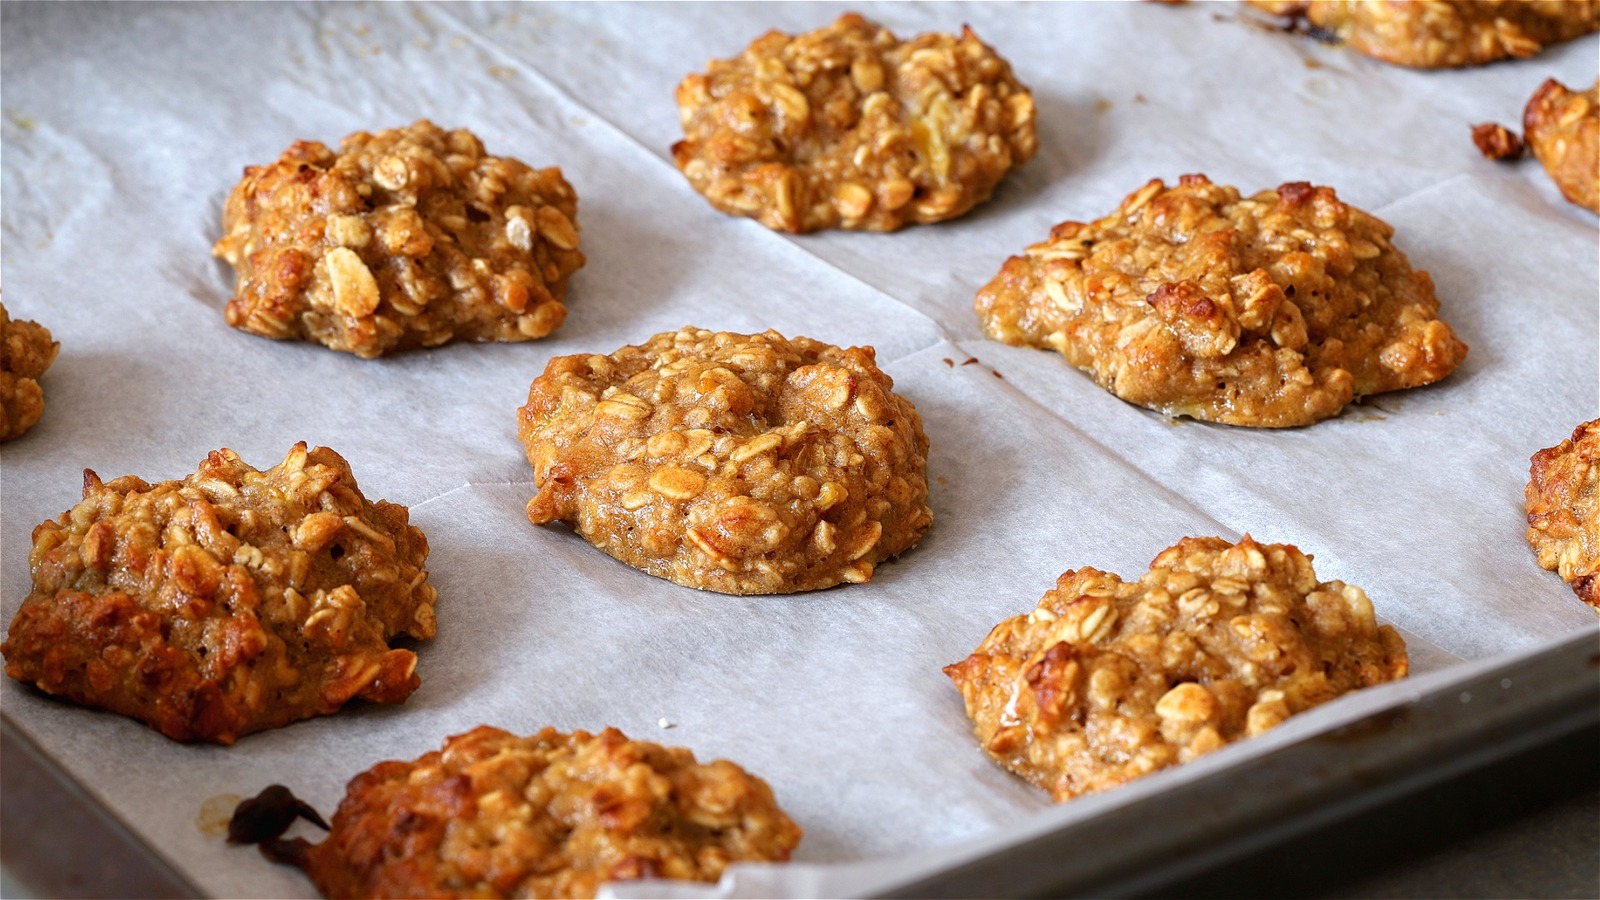 2-Ingredient Banana Oatmeal Cookies Couldn't Be Any Easier - Daily Meal